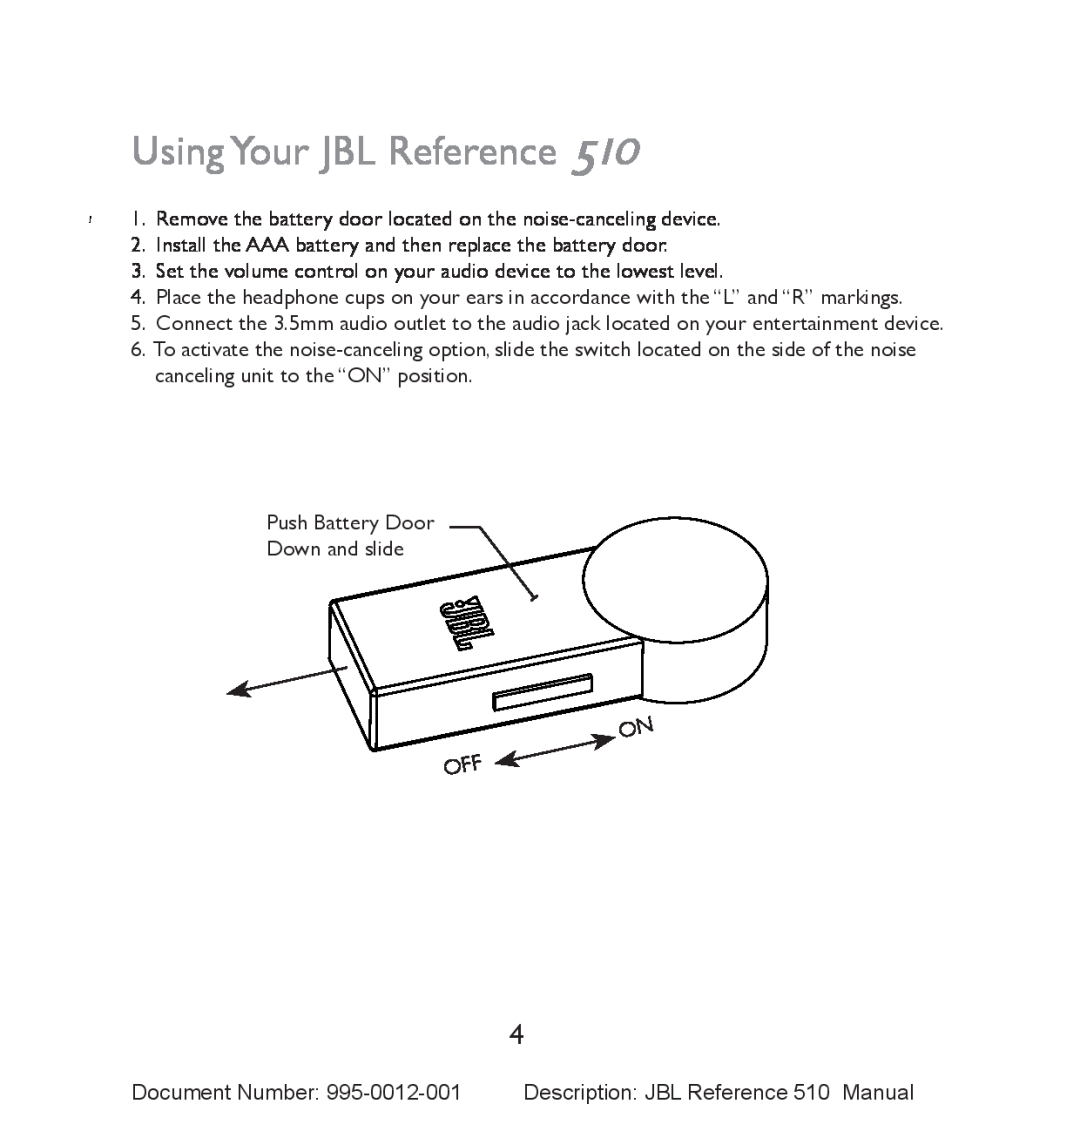 JBL 510 manual Using Your JBL Reference 